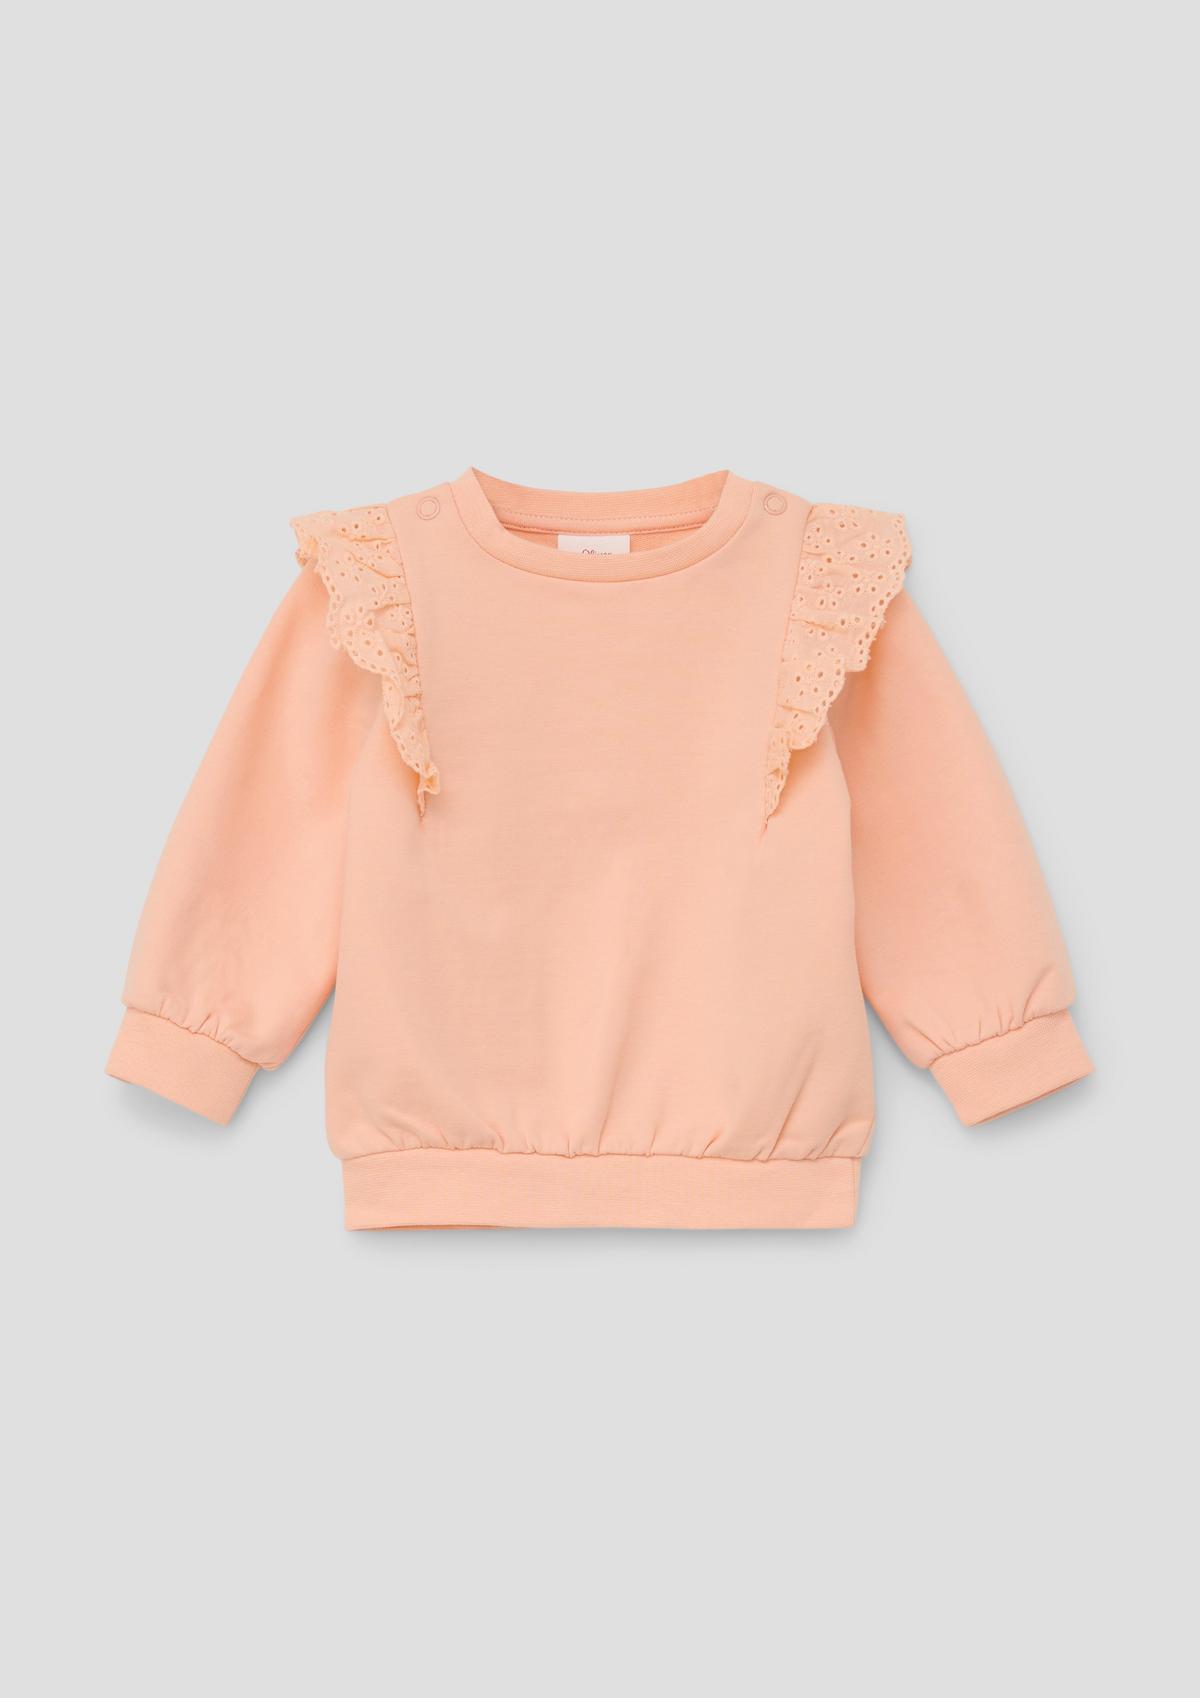 s.Oliver Sweatshirt with frill detail